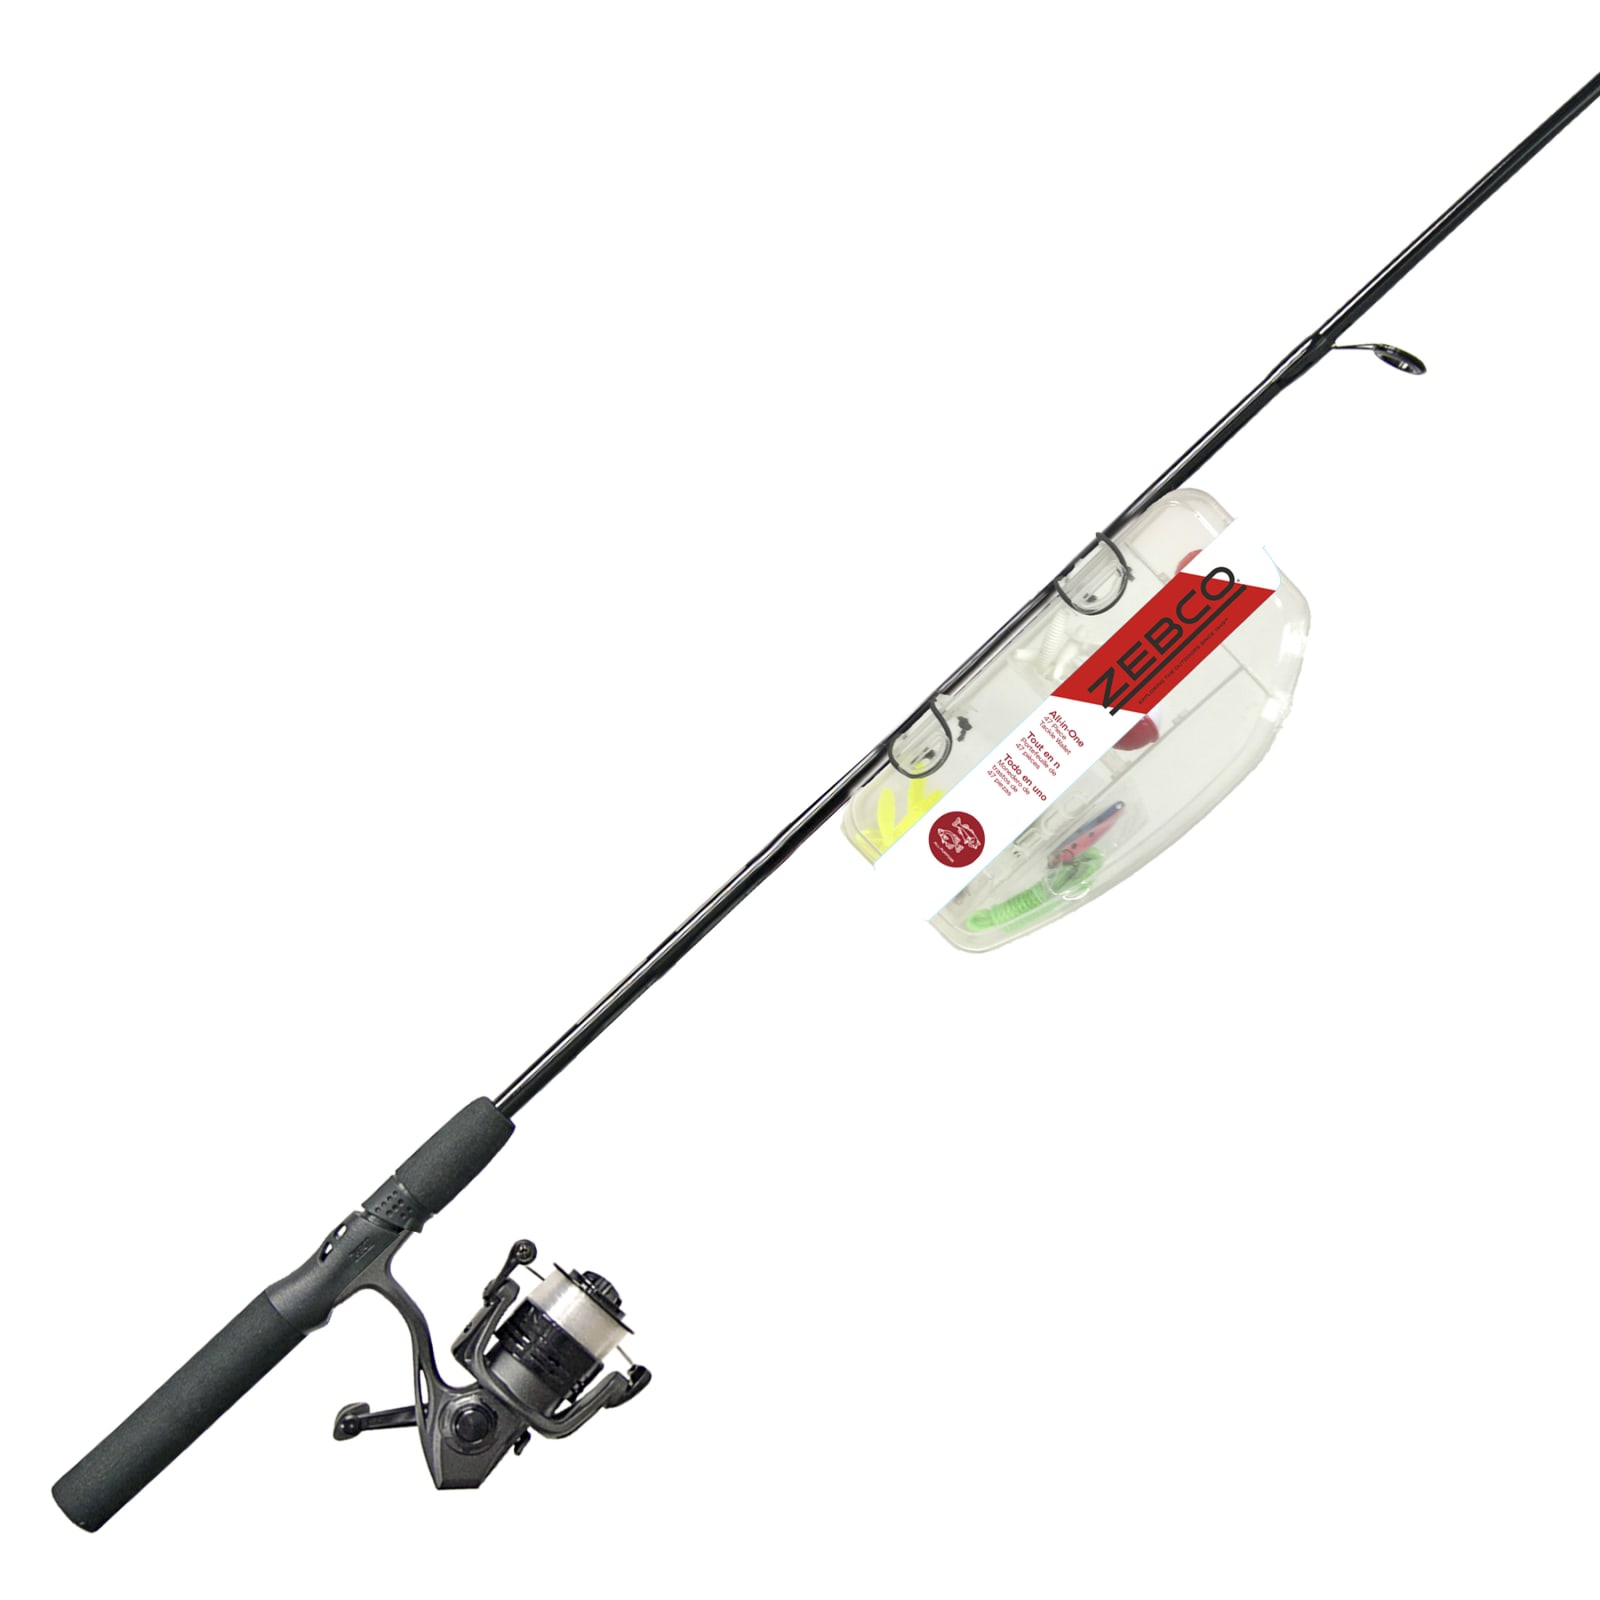 Ready Tackle Spincast Combo by Zebco at Fleet Farm